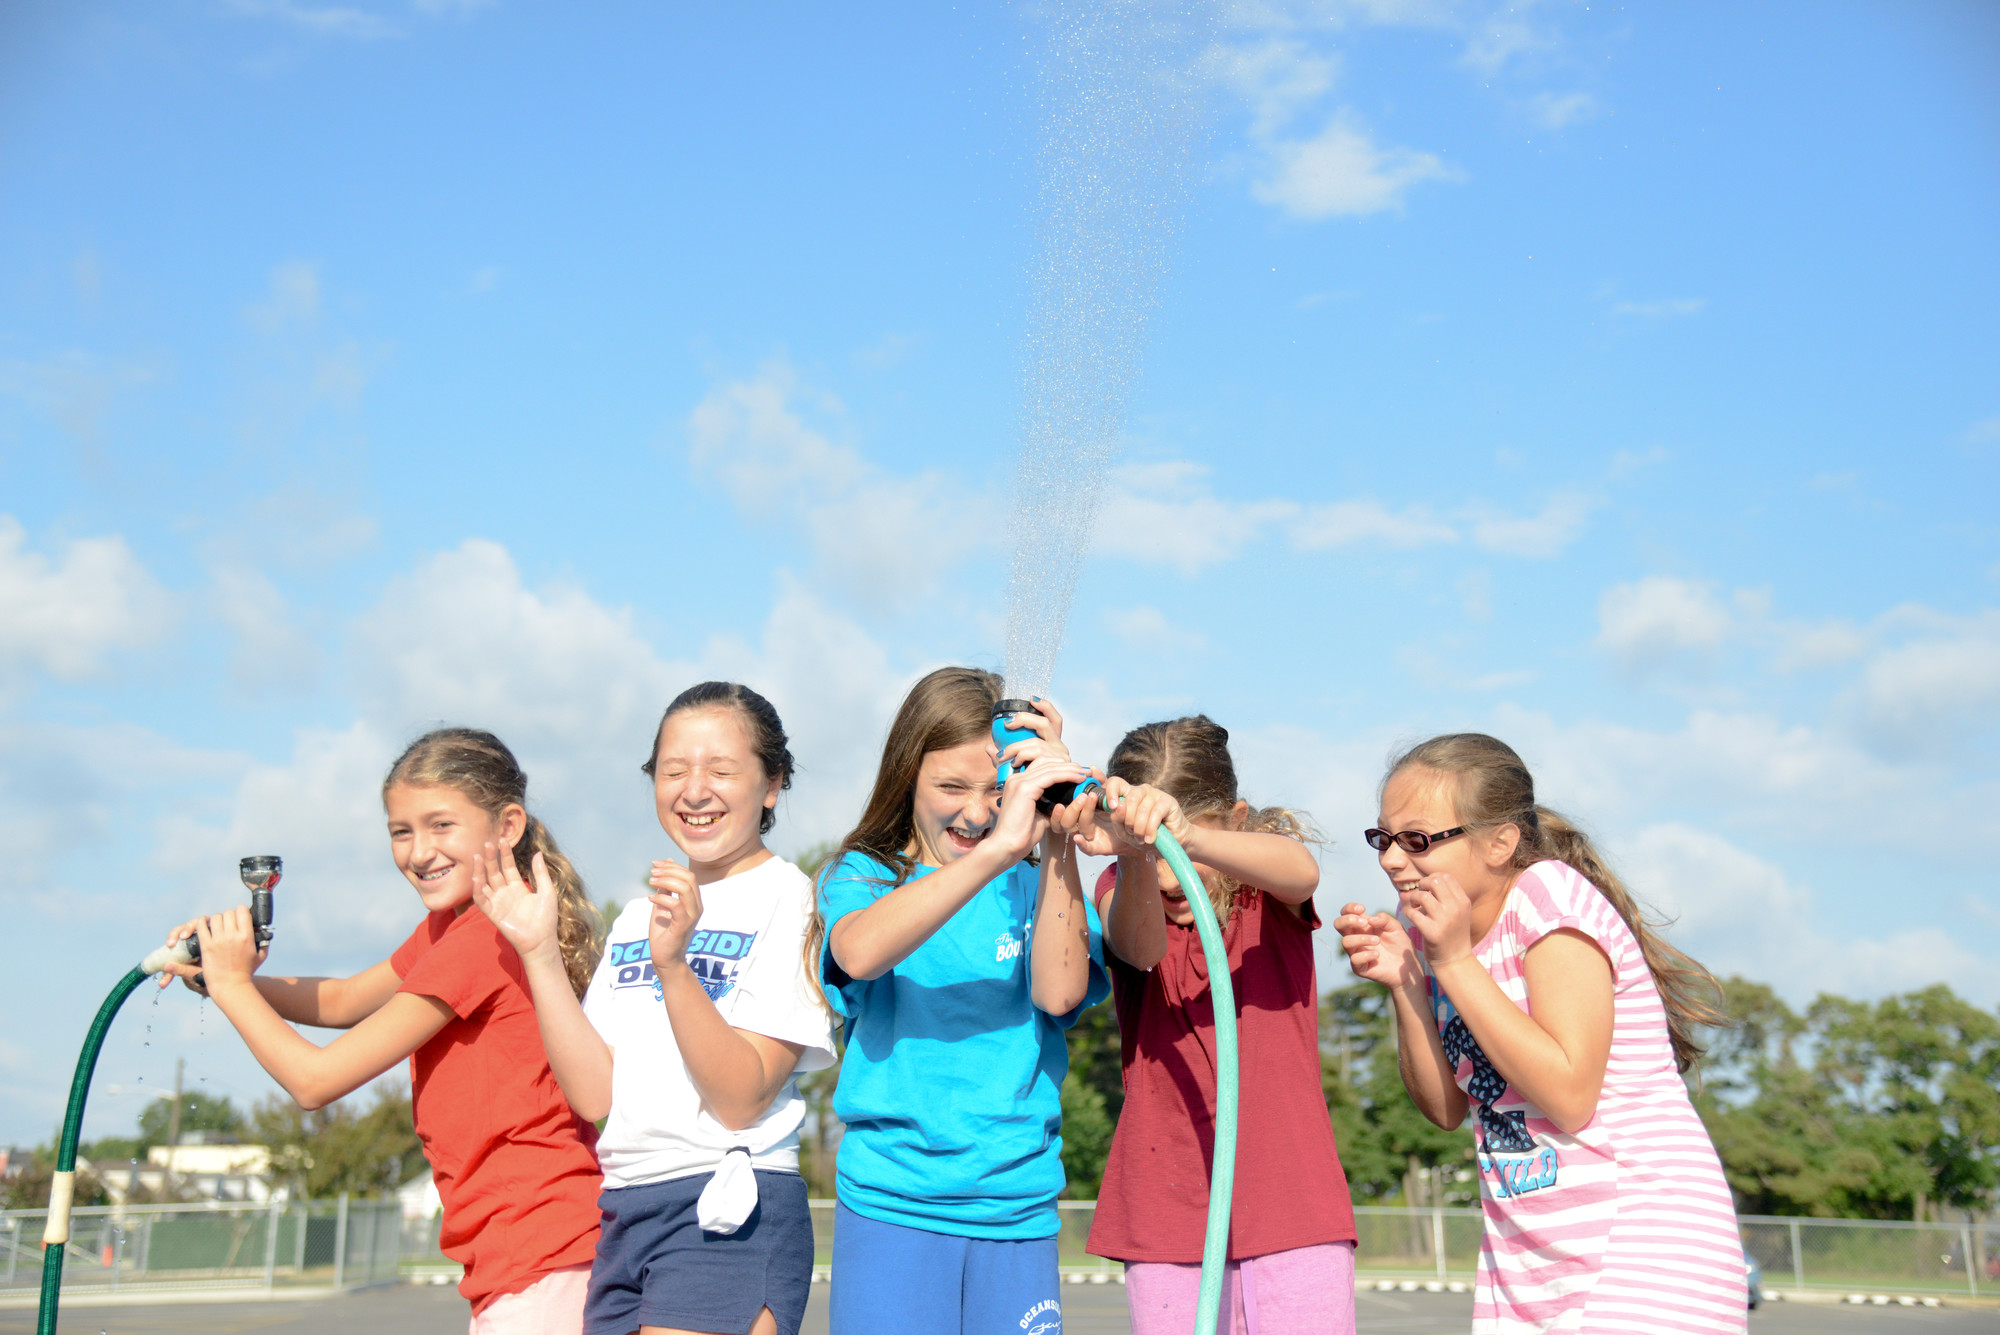 Halle Eviner, far left, Lindsay McFall, Kayla Powers, Meral Eviner and Miray Yildirim put the hoses to good use at the School No. 5 fundraiser last weekend.